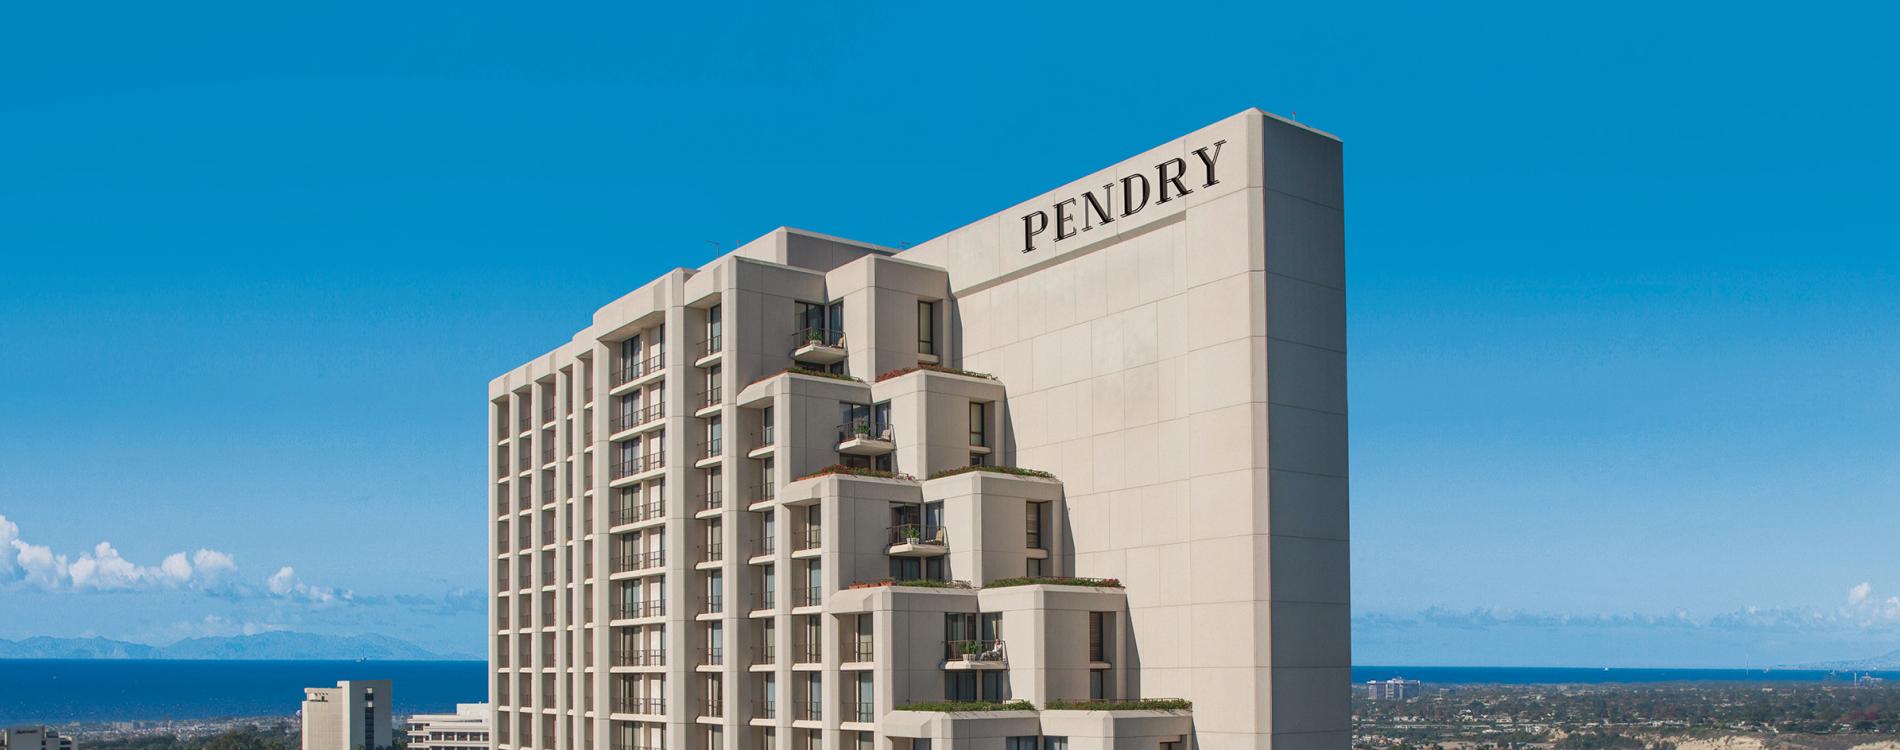 Pendry Newport Beach Hotel Review